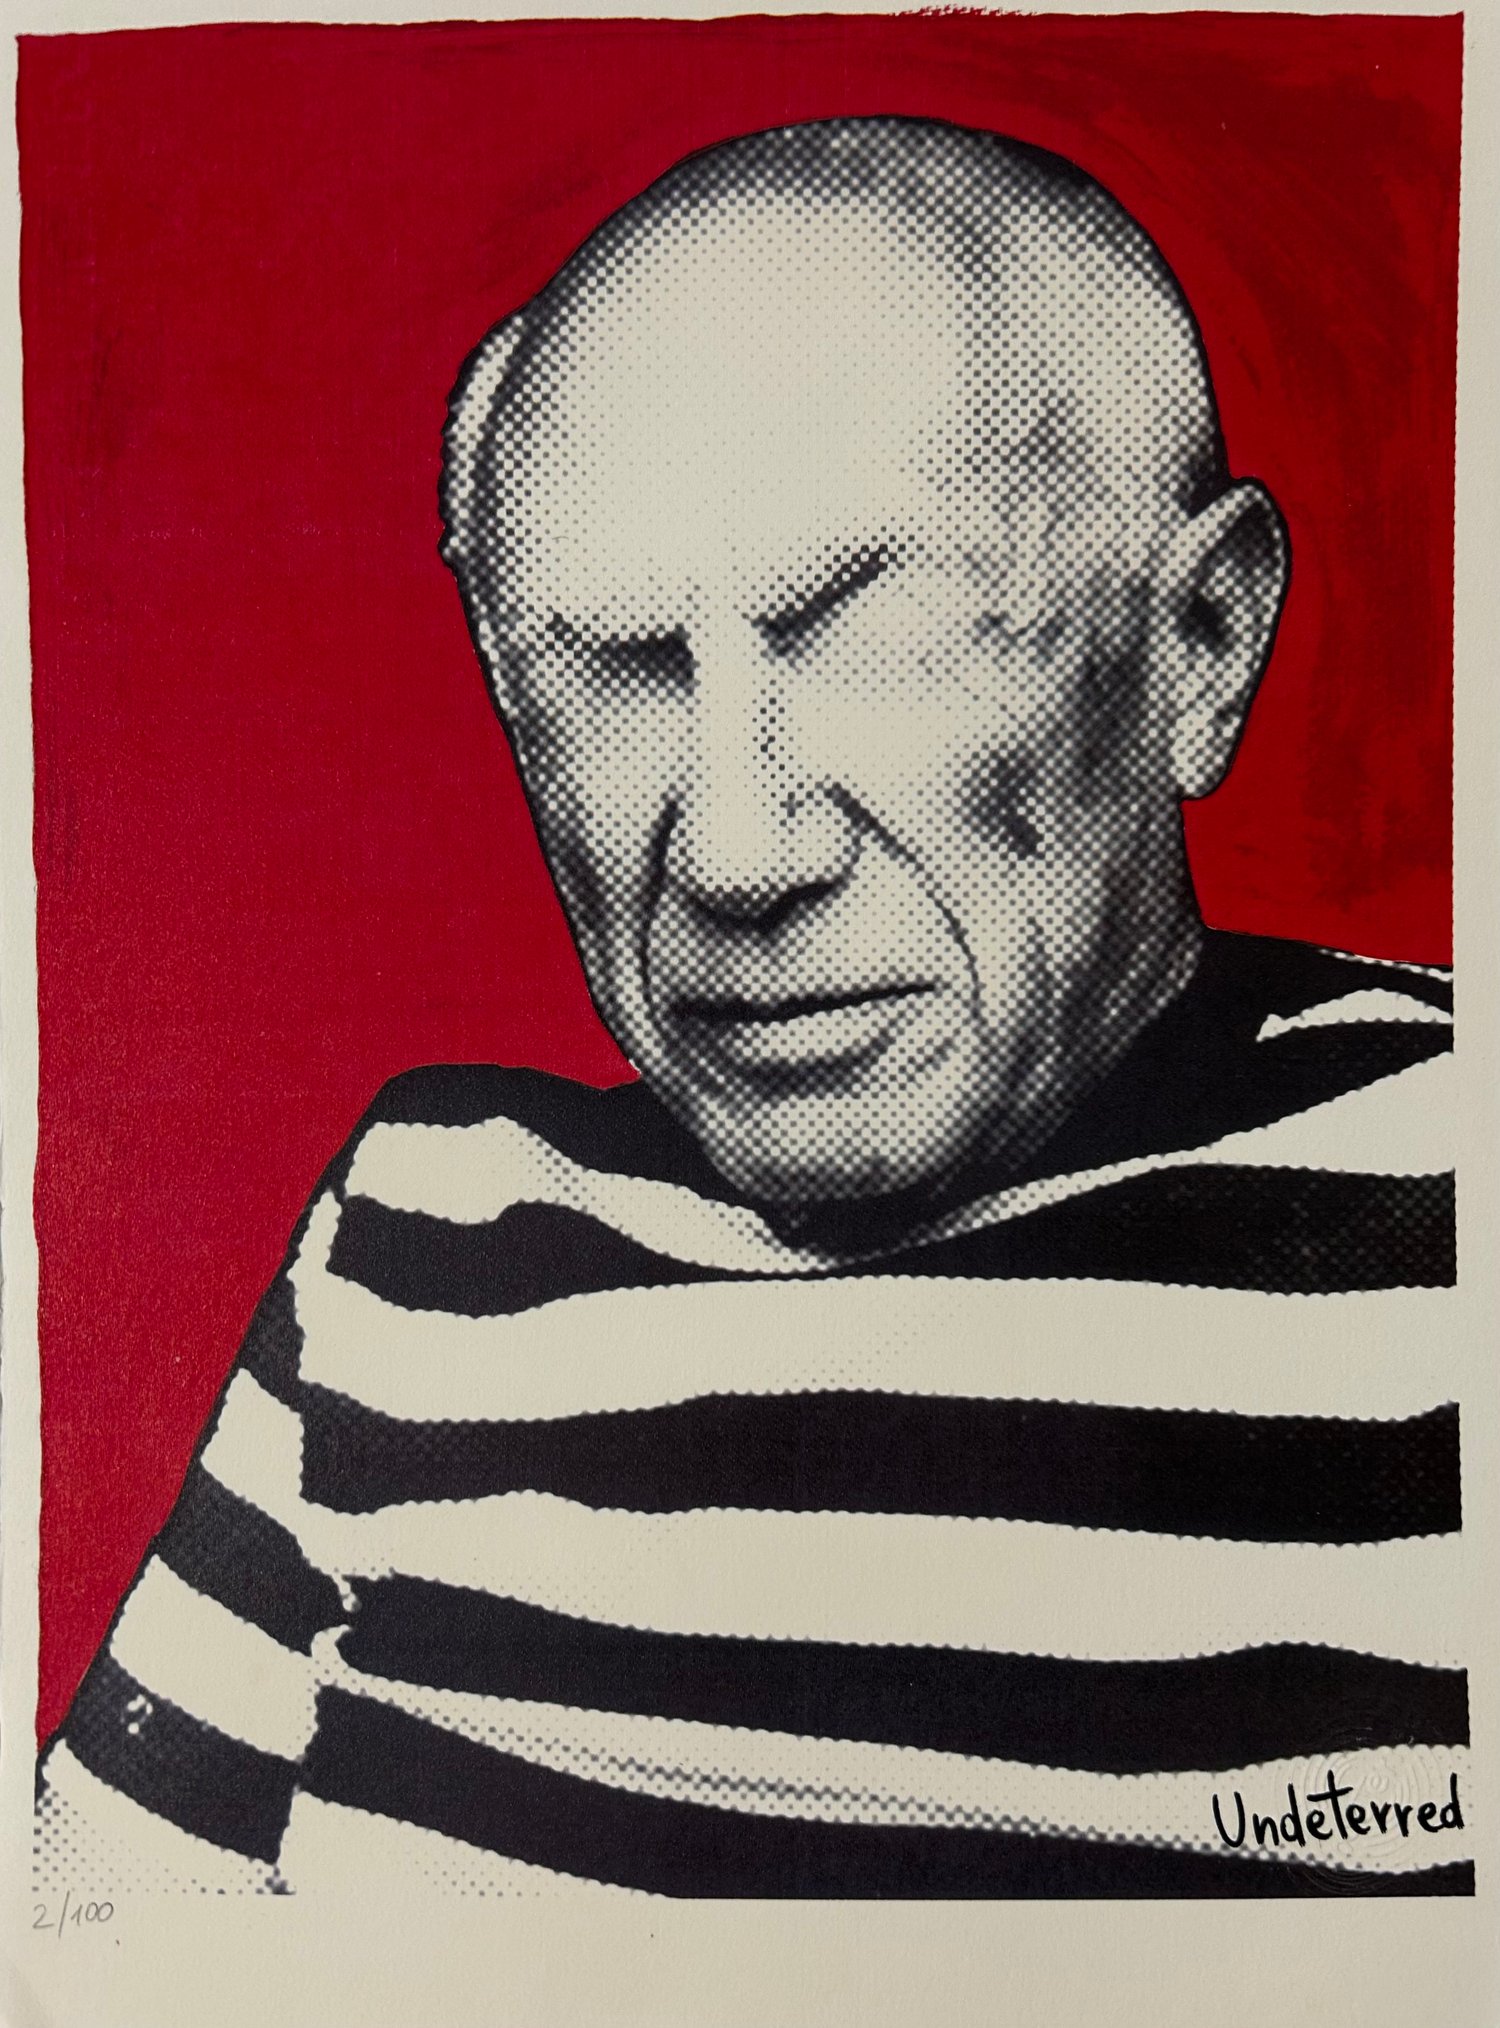 Image of Picasso by Undeterred